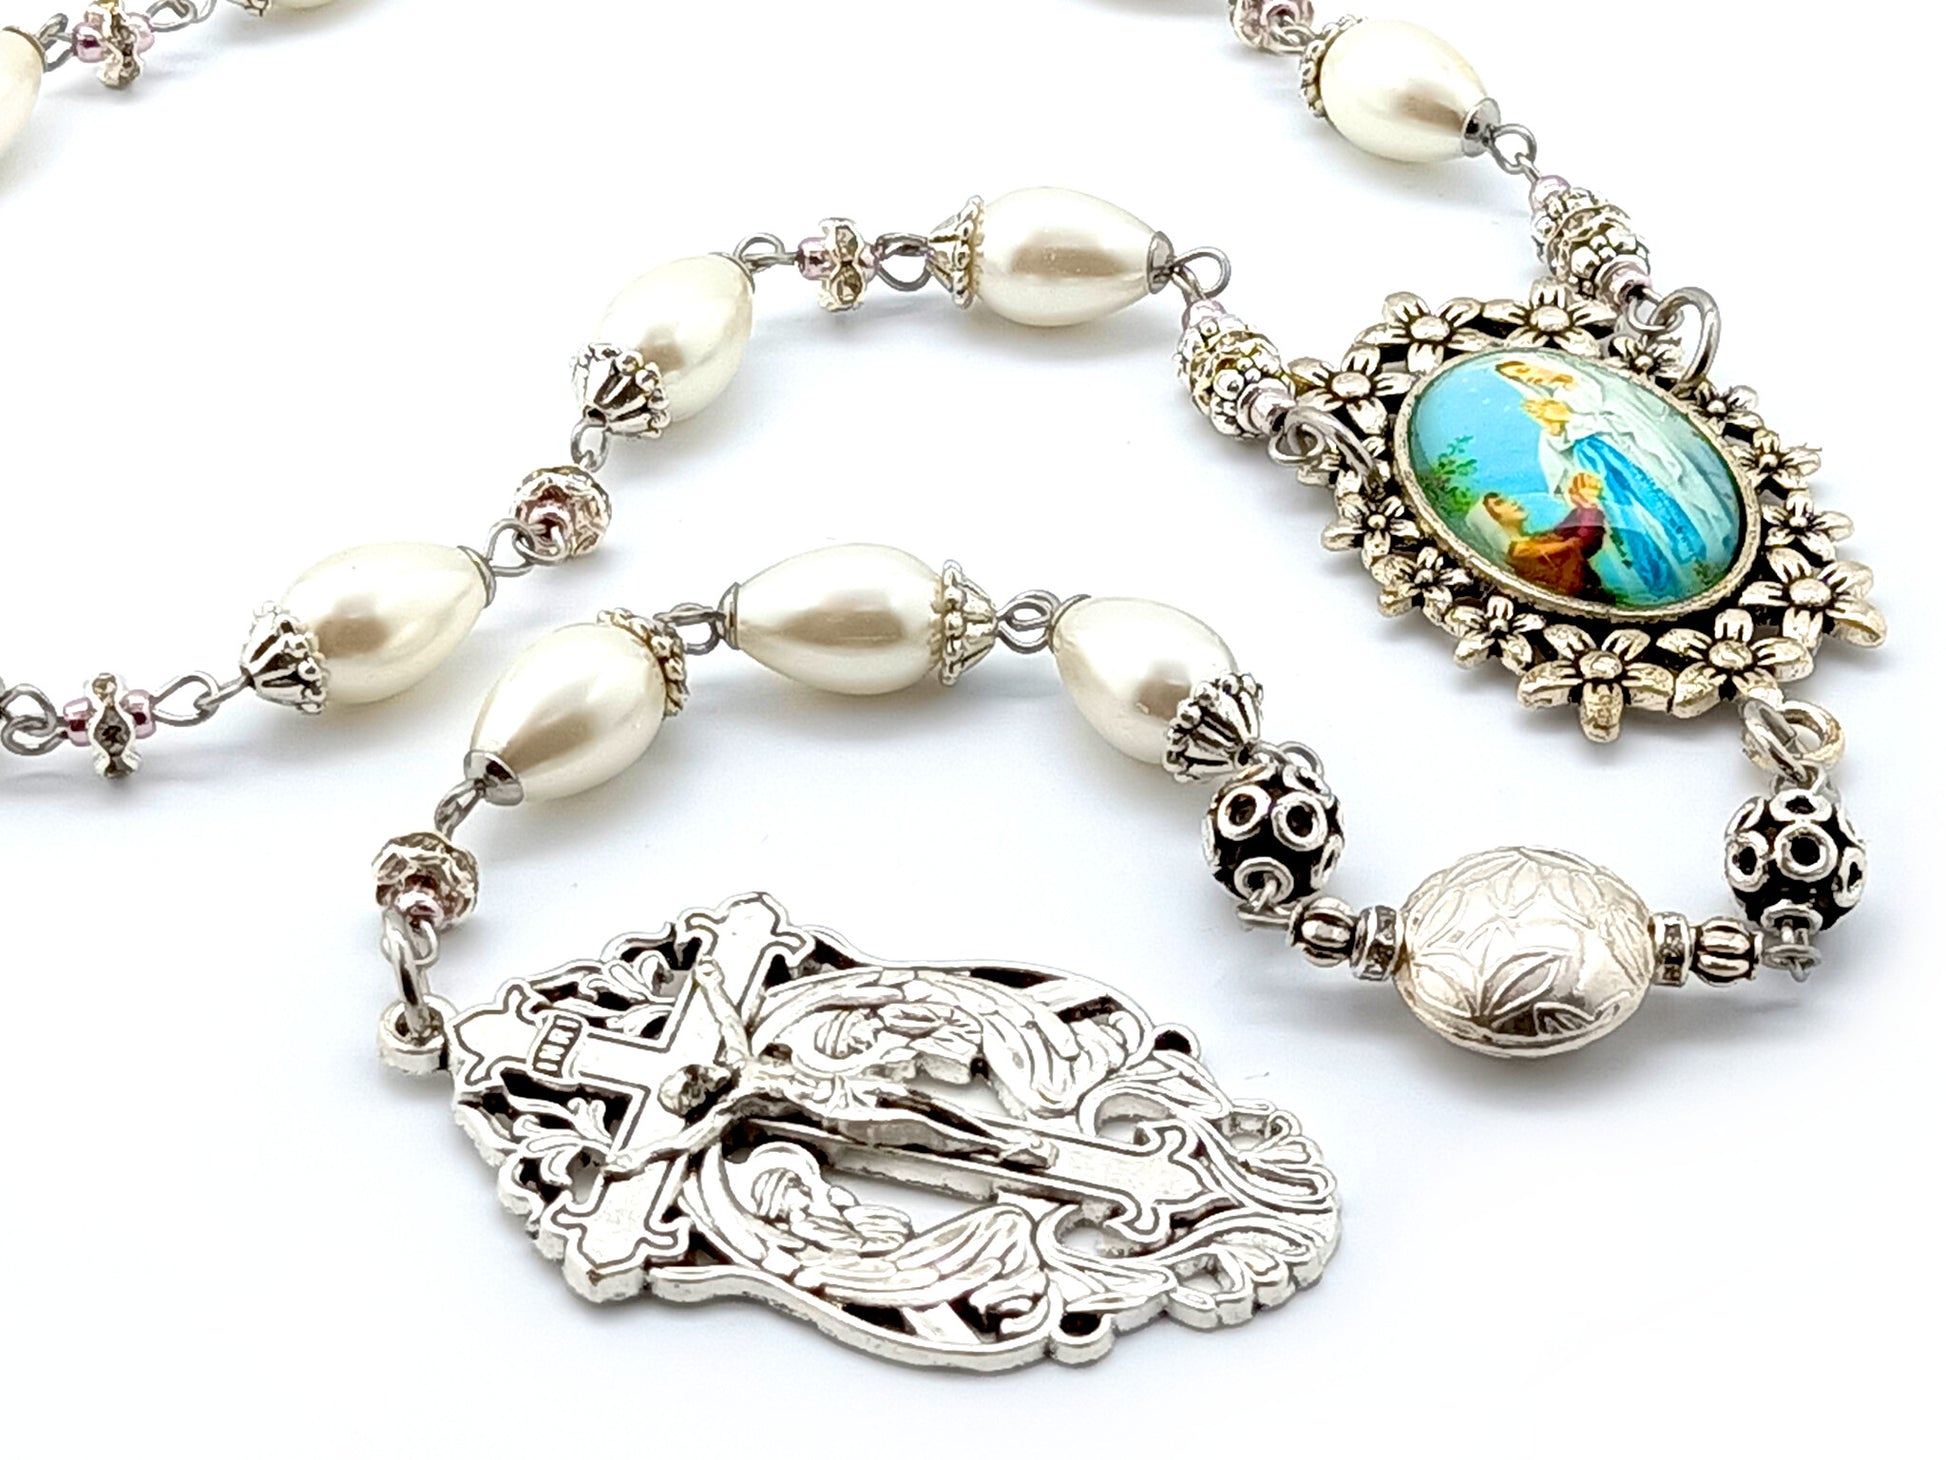 Saint Bernadette unique rosary beads single decade rosary with peral and silver beads, silver crucifix and picture centre medal.